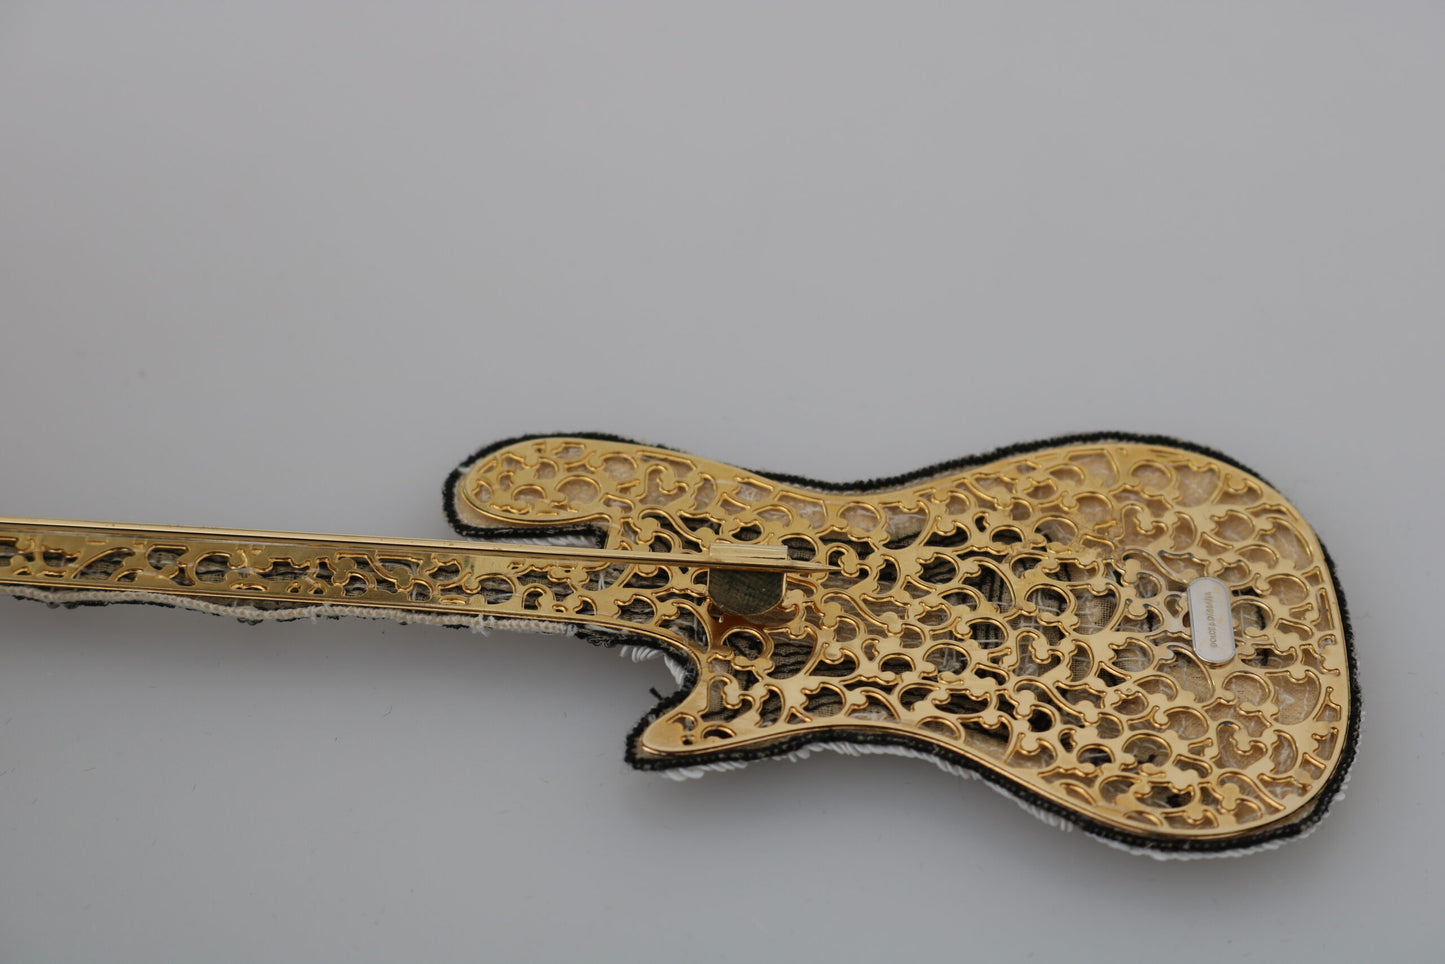 Gold Sequined Guitar Pin Brooch